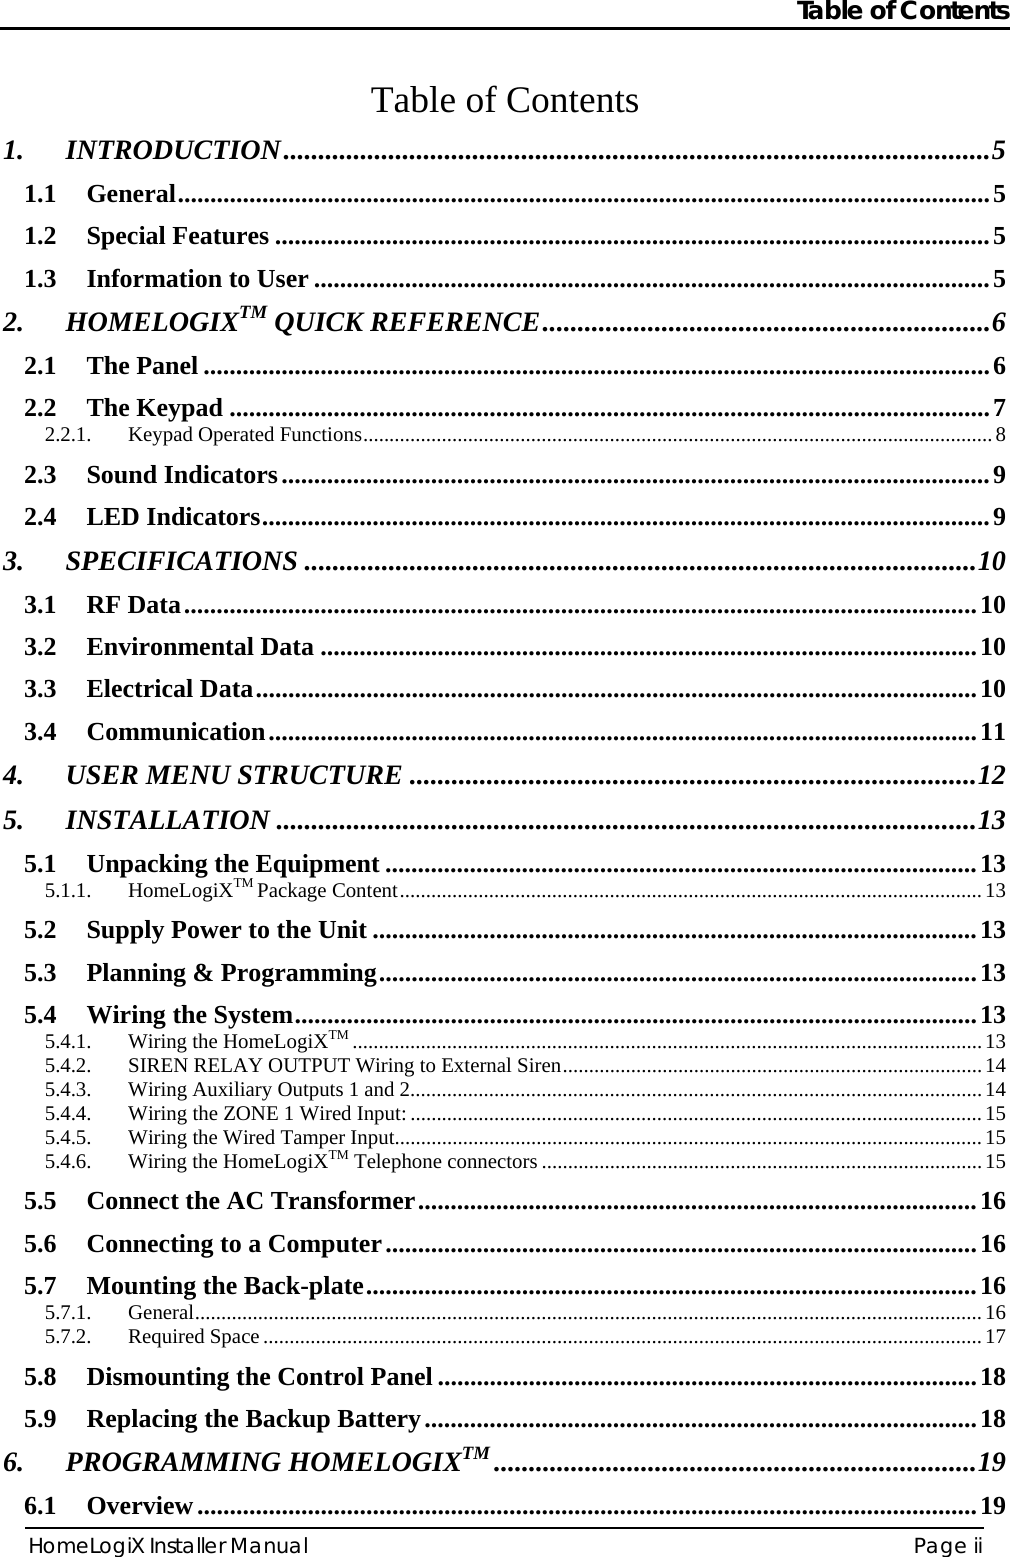 Table of Contents HomeLogiX Installer Manual  Page ii  Table of Contents 1. INTRODUCTION.....................................................................................................5 1.1 General.............................................................................................................................5 1.2 Special Features ..............................................................................................................5 1.3 Information to User ........................................................................................................5 2. HOMELOGIXTM QUICK REFERENCE................................................................6 2.1 The Panel .........................................................................................................................6 2.2 The Keypad .....................................................................................................................7 2.2.1. Keypad Operated Functions........................................................................................................................8 2.3 Sound Indicators.............................................................................................................9 2.4 LED Indicators................................................................................................................9 3. SPECIFICATIONS ................................................................................................10 3.1 RF Data..........................................................................................................................10 3.2 Environmental Data .....................................................................................................10 3.3 Electrical Data...............................................................................................................10 3.4 Communication.............................................................................................................11 4. USER MENU STRUCTURE .................................................................................12 5. INSTALLATION ....................................................................................................13 5.1 Unpacking the Equipment ...........................................................................................13 5.1.1. HomeLogiXTM Package Content...............................................................................................................13 5.2 Supply Power to the Unit .............................................................................................13 5.3 Planning &amp; Programming............................................................................................13 5.4 Wiring the System.........................................................................................................13 5.4.1. Wiring the HomeLogiXTM ........................................................................................................................13 5.4.2. SIREN RELAY OUTPUT Wiring to External Siren................................................................................14 5.4.3. Wiring Auxiliary Outputs 1 and 2.............................................................................................................14 5.4.4. Wiring the ZONE 1 Wired Input:.............................................................................................................15 5.4.5. Wiring the Wired Tamper Input................................................................................................................15 5.4.6. Wiring the HomeLogiXTM Telephone connectors ....................................................................................15 5.5 Connect the AC Transformer......................................................................................16 5.6 Connecting to a Computer...........................................................................................16 5.7 Mounting the Back-plate..............................................................................................16 5.7.1. General......................................................................................................................................................16 5.7.2. Required Space.........................................................................................................................................17 5.8 Dismounting the Control Panel ...................................................................................18 5.9 Replacing the Backup Battery.....................................................................................18 6. PROGRAMMING HOMELOGIXTM .....................................................................19 6.1 Overview........................................................................................................................19 